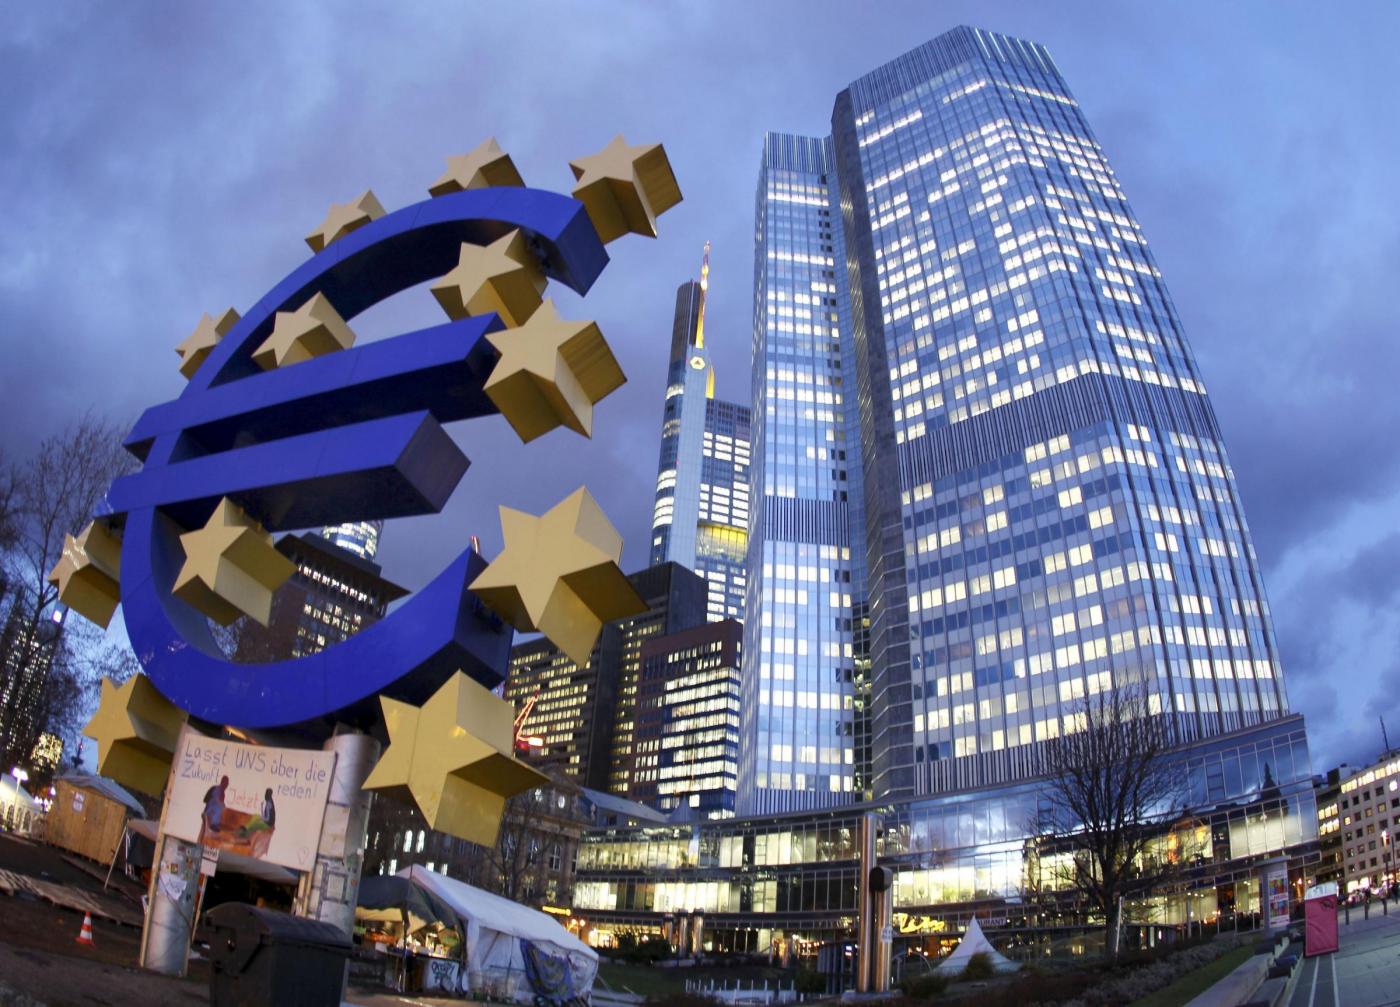 ECB Eyeing the Possibility of Issuing A Digital Euro